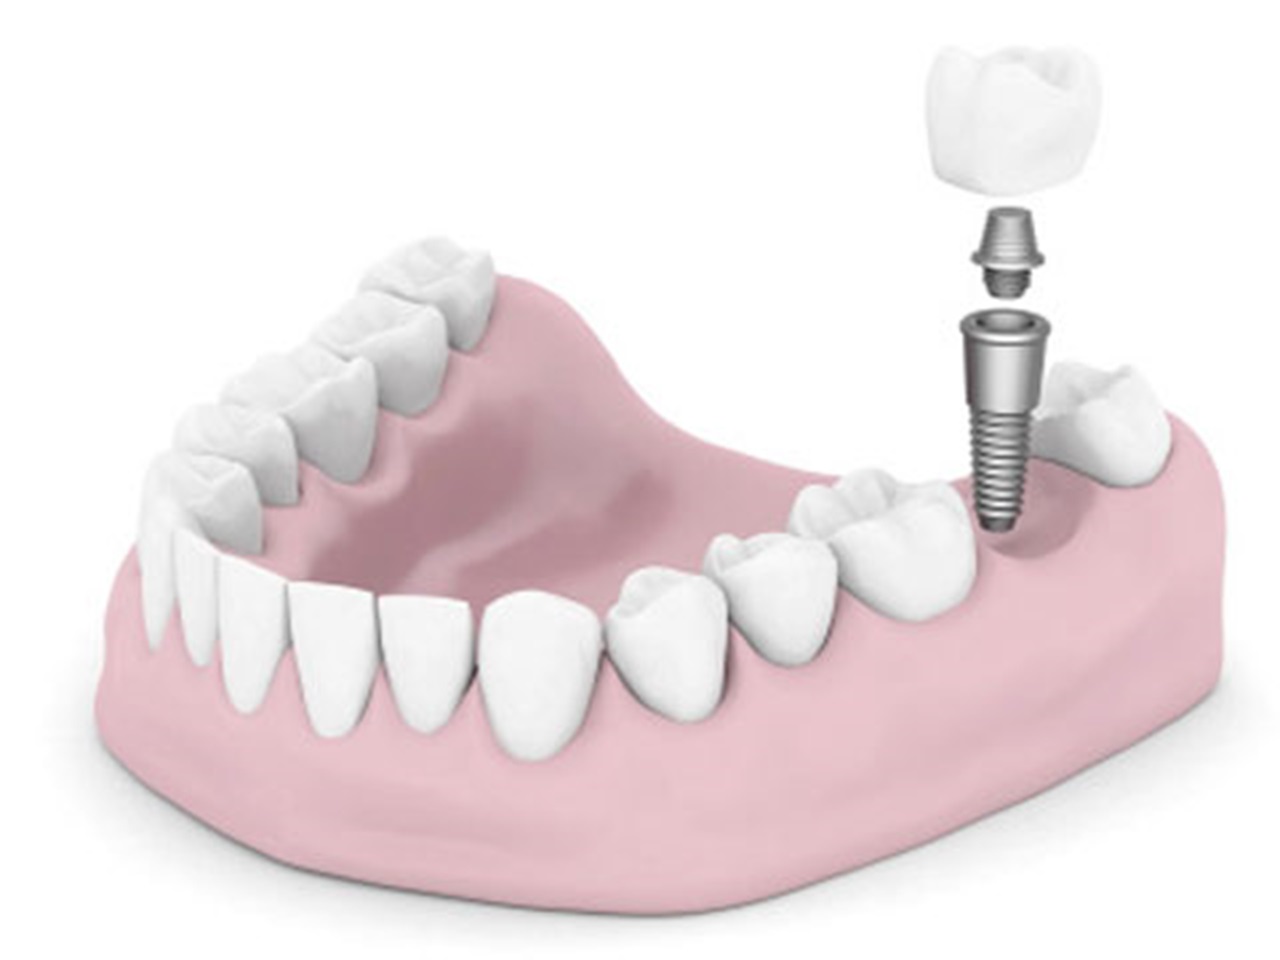 Computer generated 3-D image of a dental implant.